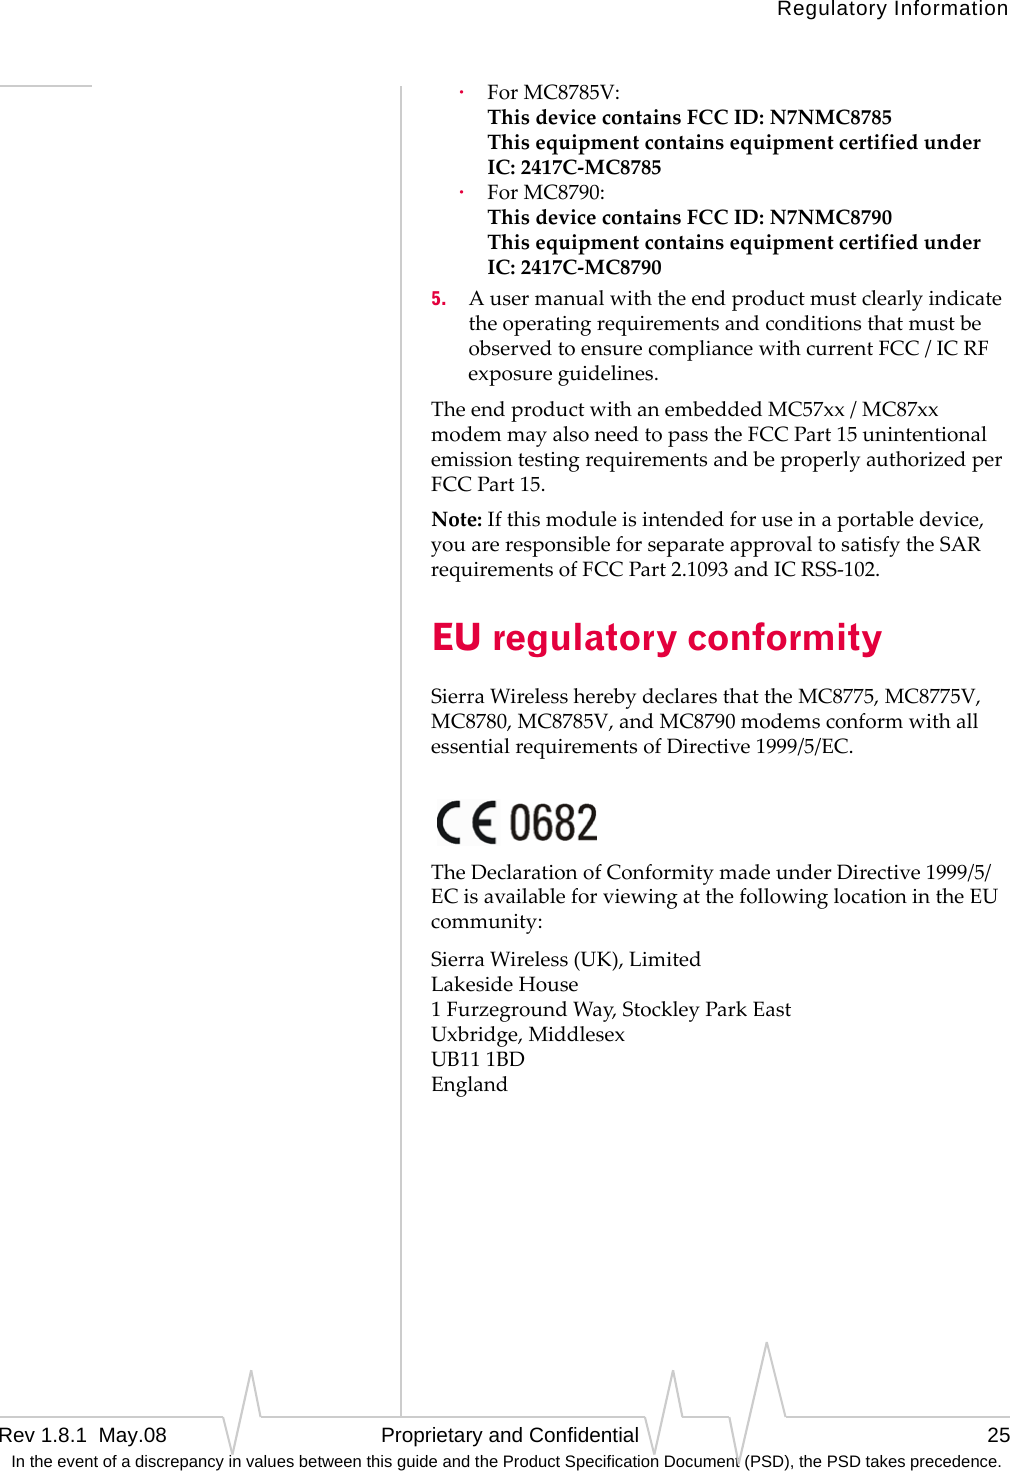 Regulatory InformationRev 1.8.1  May.08   Proprietary and Confidential 25 In the event of a discrepancy in values between this guide and the Product Specification Document (PSD), the PSD takes precedence.·ForMC8785V: ThisdevicecontainsFCCID:N7NMC8785 ThisequipmentcontainsequipmentcertifiedunderIC:2417C‐MC8785·ForMC8790: ThisdevicecontainsFCCID:N7NMC8790 ThisequipmentcontainsequipmentcertifiedunderIC:2417C‐MC87905. AusermanualwiththeendproductmustclearlyindicatetheoperatingrequirementsandconditionsthatmustbeobservedtoensurecompliancewithcurrentFCC/ICRFexposureguidelines.TheendproductwithanembeddedMC57xx/MC87xxmodemmayalsoneedtopasstheFCCPart15unintentionalemissiontestingrequirementsandbeproperlyauthorizedperFCCPart15.Note:Ifthismoduleisintendedforuseinaportabledevice,youareresponsibleforseparateapprovaltosatisfytheSARrequirementsofFCCPart2.1093andICRSS‐102.EU regulatory conformitySierraWirelessherebydeclaresthattheMC8775,MC8775V,MC8780,MC8785V,andMC8790modemsconformwithallessentialrequirementsofDirective1999/5/EC.TheDeclarationofConformitymadeunderDirective1999/5/ECisavailableforviewingatthefollowinglocationintheEUcommunity:SierraWireless(UK),Limited LakesideHouse 1FurzegroundWay,StockleyParkEast Uxbridge,Middlesex UB111BD England